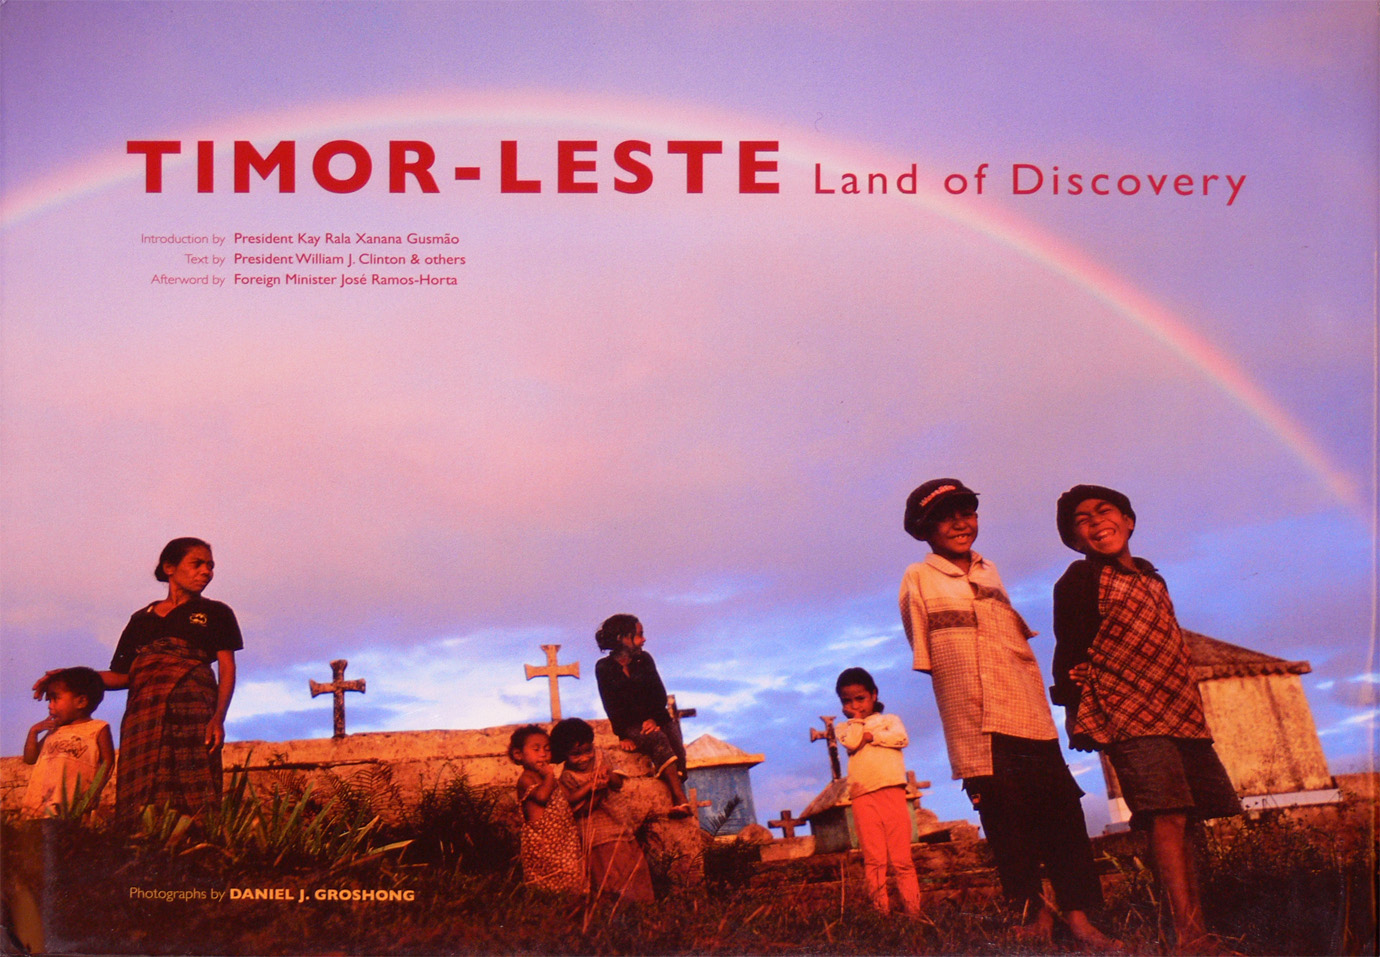 Timor-Leste: Land of Discovery